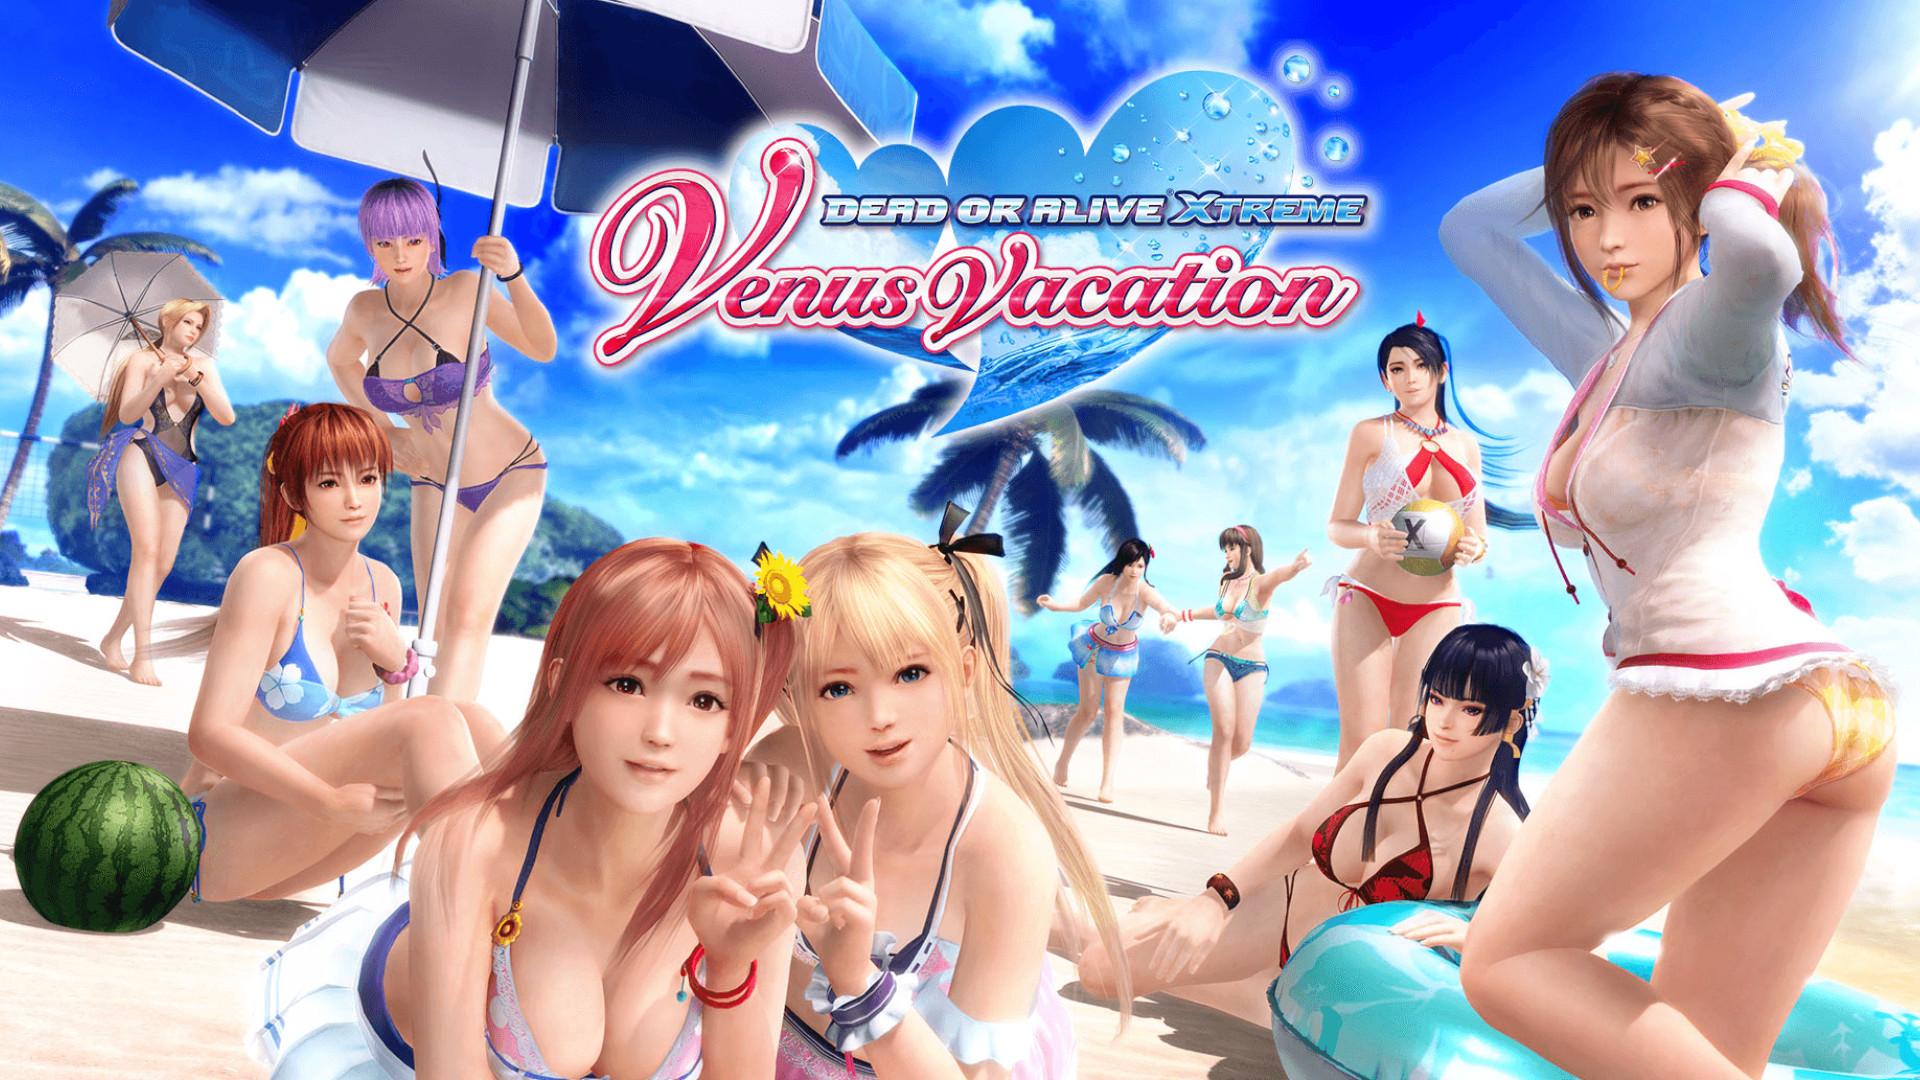 Dead or Alive Xtreme once again launches outside Japan thanks to a hentai platform